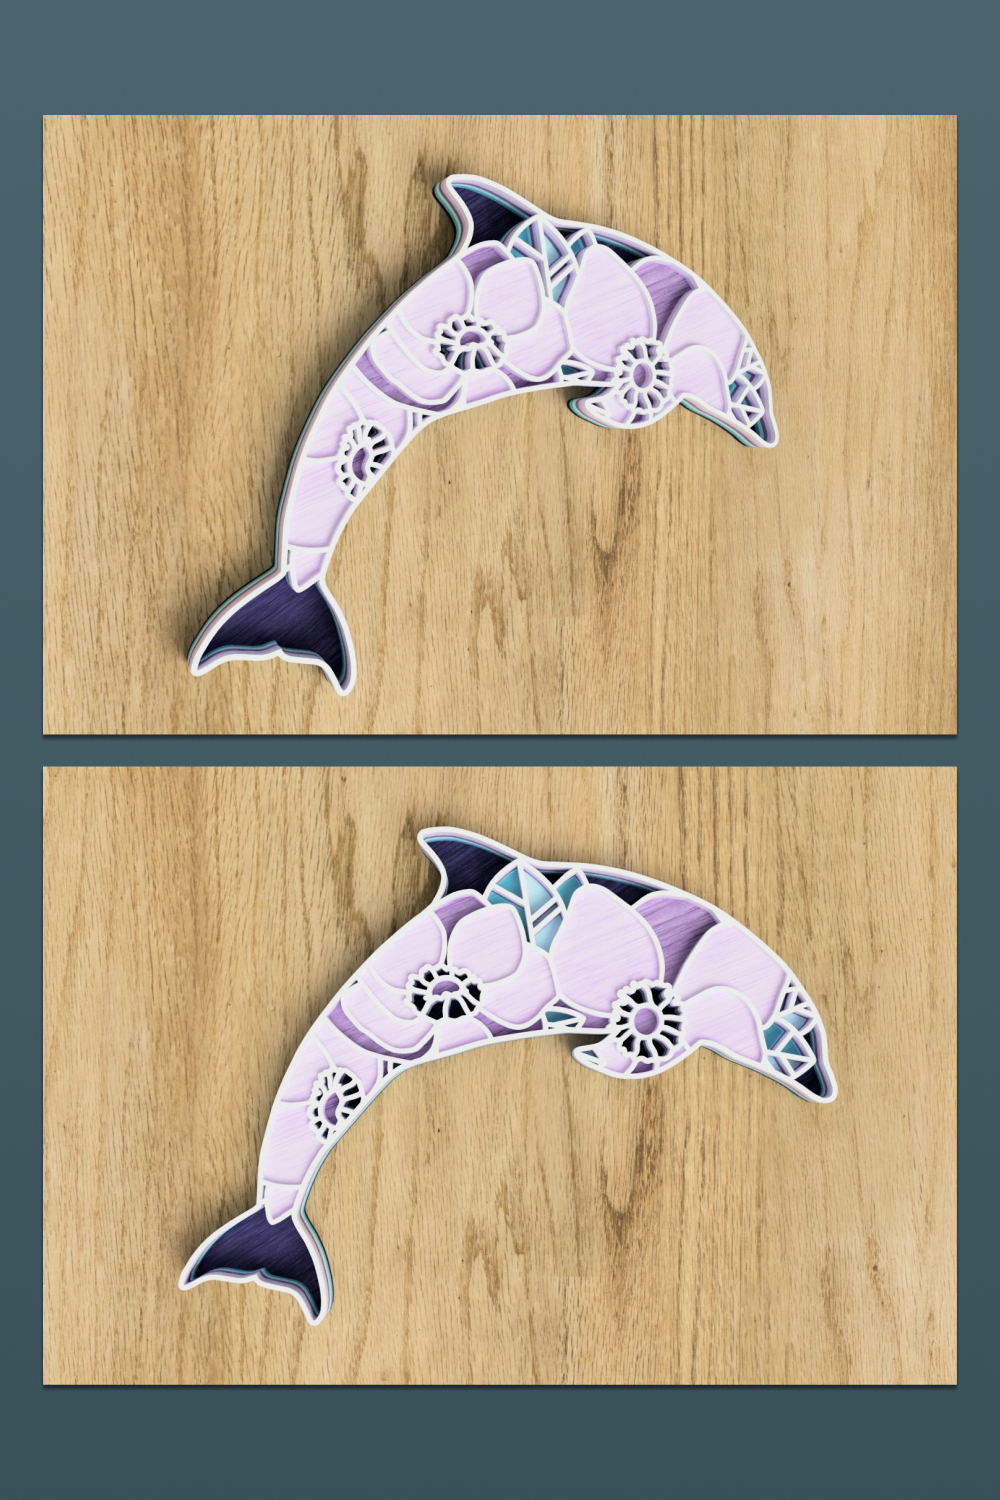 Two pictures of a dolphin on a wooden surface.